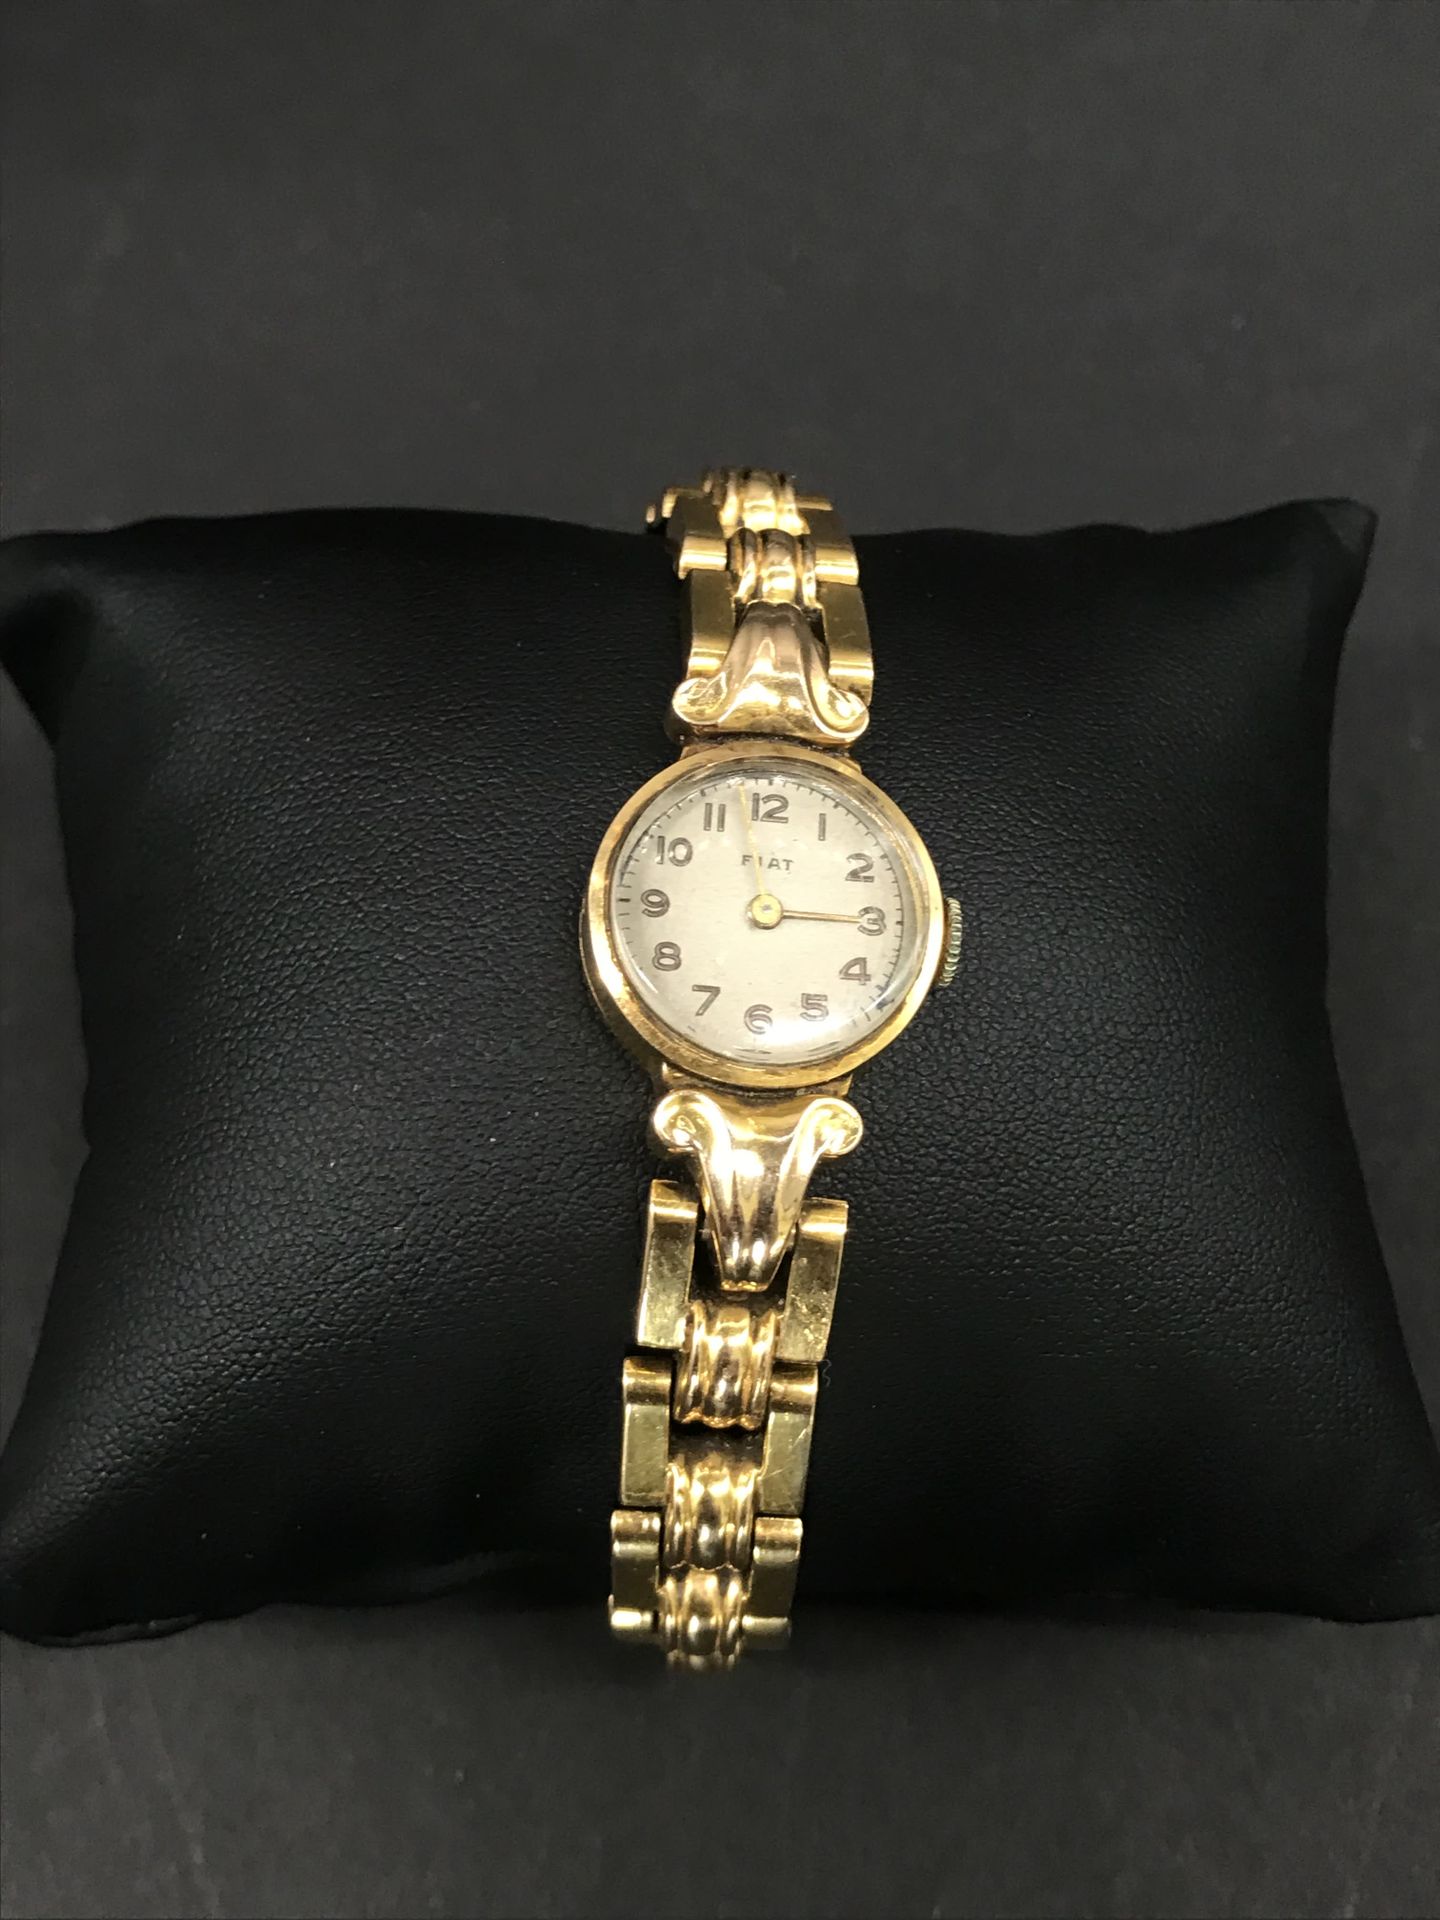 Null FIAT LADY'S WATCH

in 18k yellow gold

mechanical in working order

Punches&hellip;